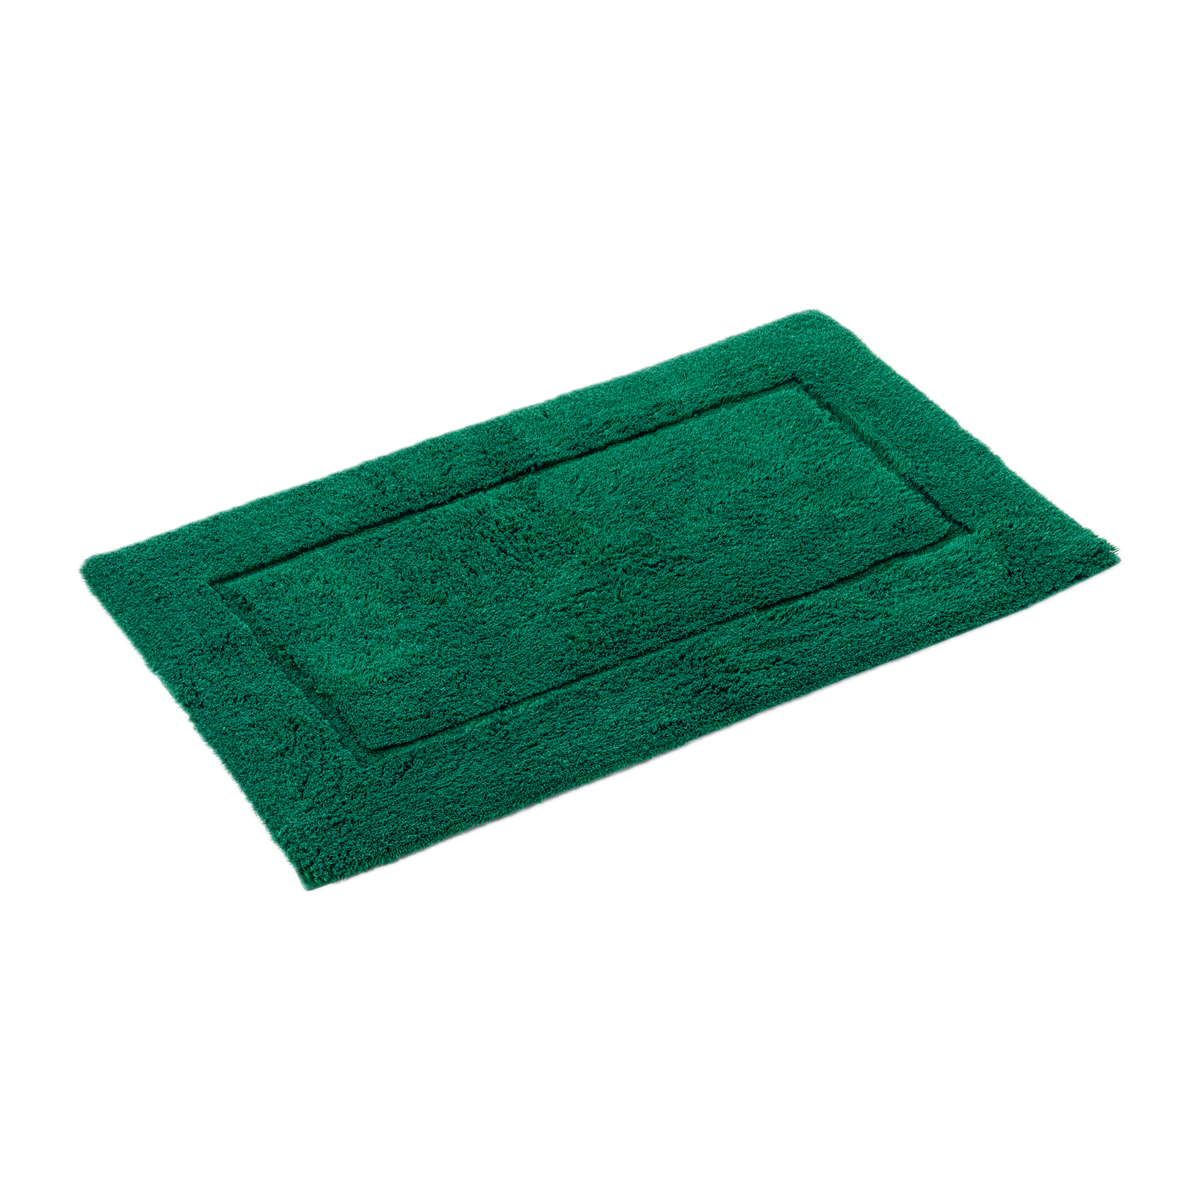 Slanted View of Abyss Habidecor Must Bath Rug in British Green Color